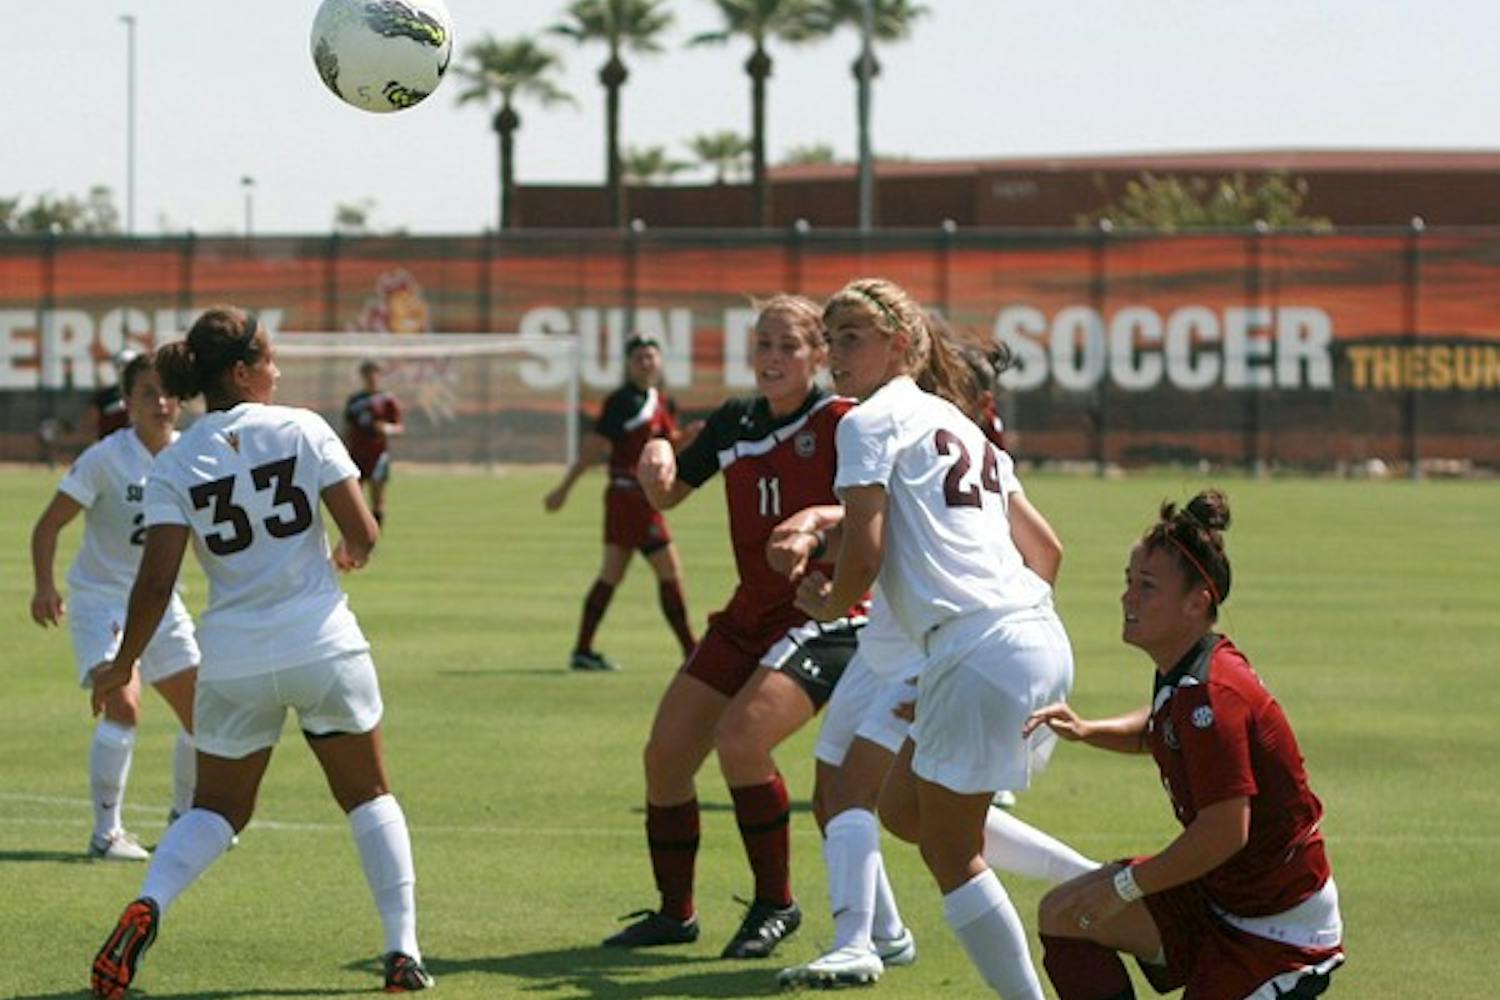 OPEN FIELD: ASU sophomore defender Kaitlyn Pavlovich (24) tracks the ball along with two South Carolina defenders during the Sun Devils’ close 1-0 win over the Gamecocks on Sunday. Pavlovich and the rest of the team travel to Virginia to take on the Cavaliers on Friday. (Photo by Michaela Mader)